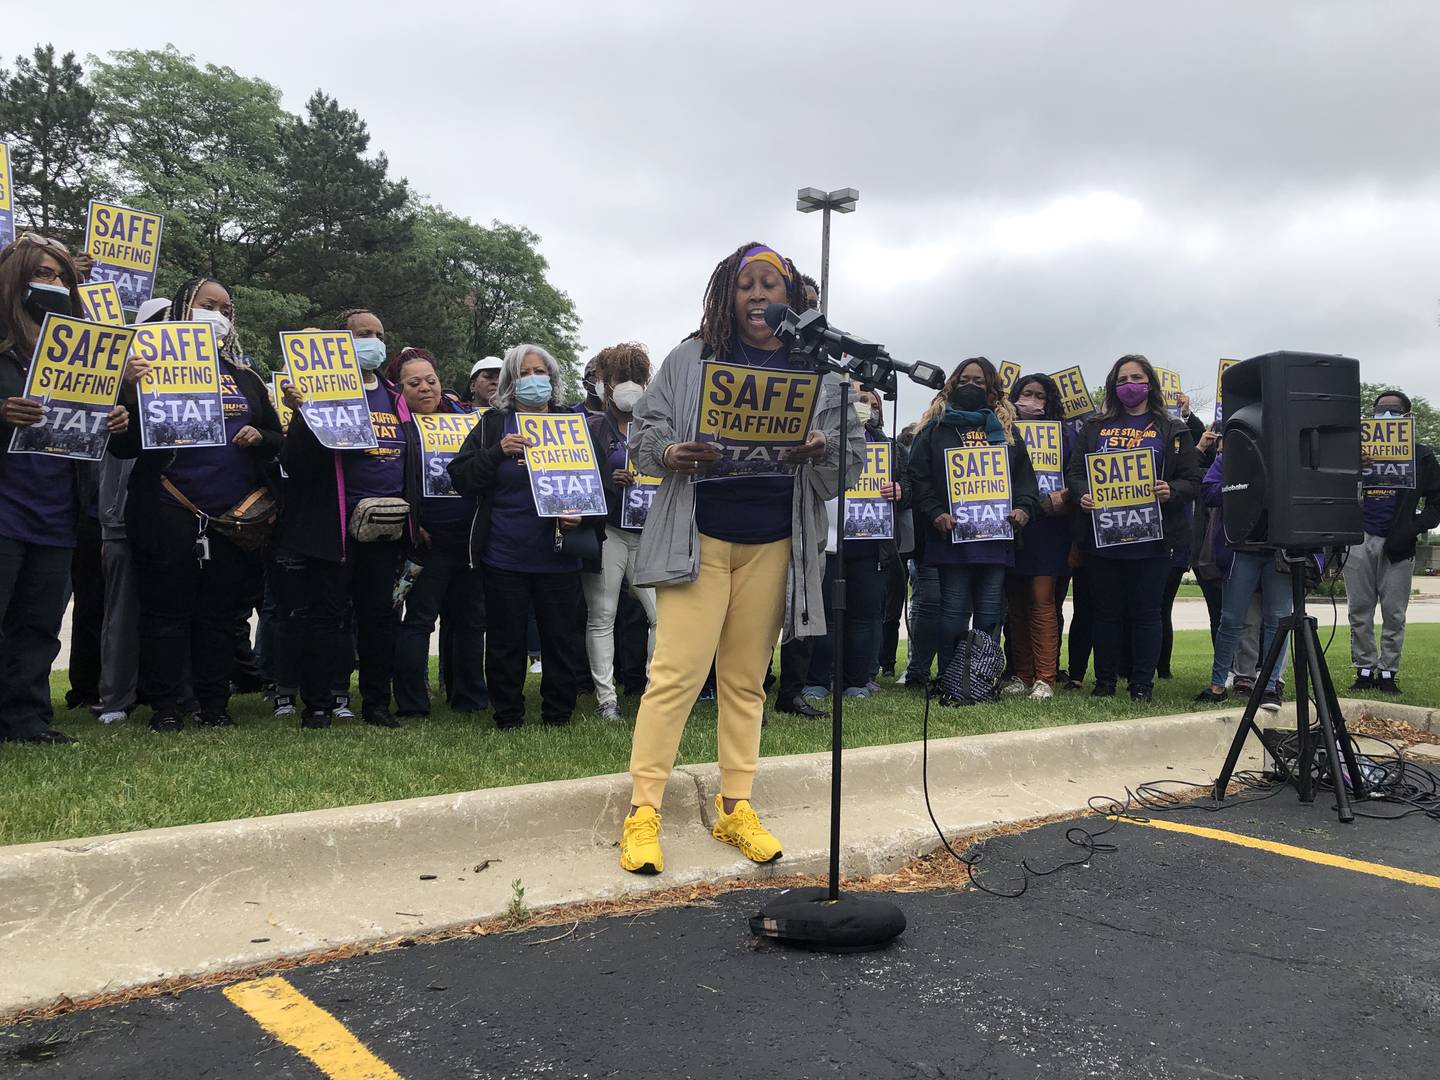 Yolanda Stewart, patient care technician at Northwestern Memorial Hospital, spoke during a rally June 7, 2022, asking the Joint Commission to include safe staffing levels for hospital accreditation.